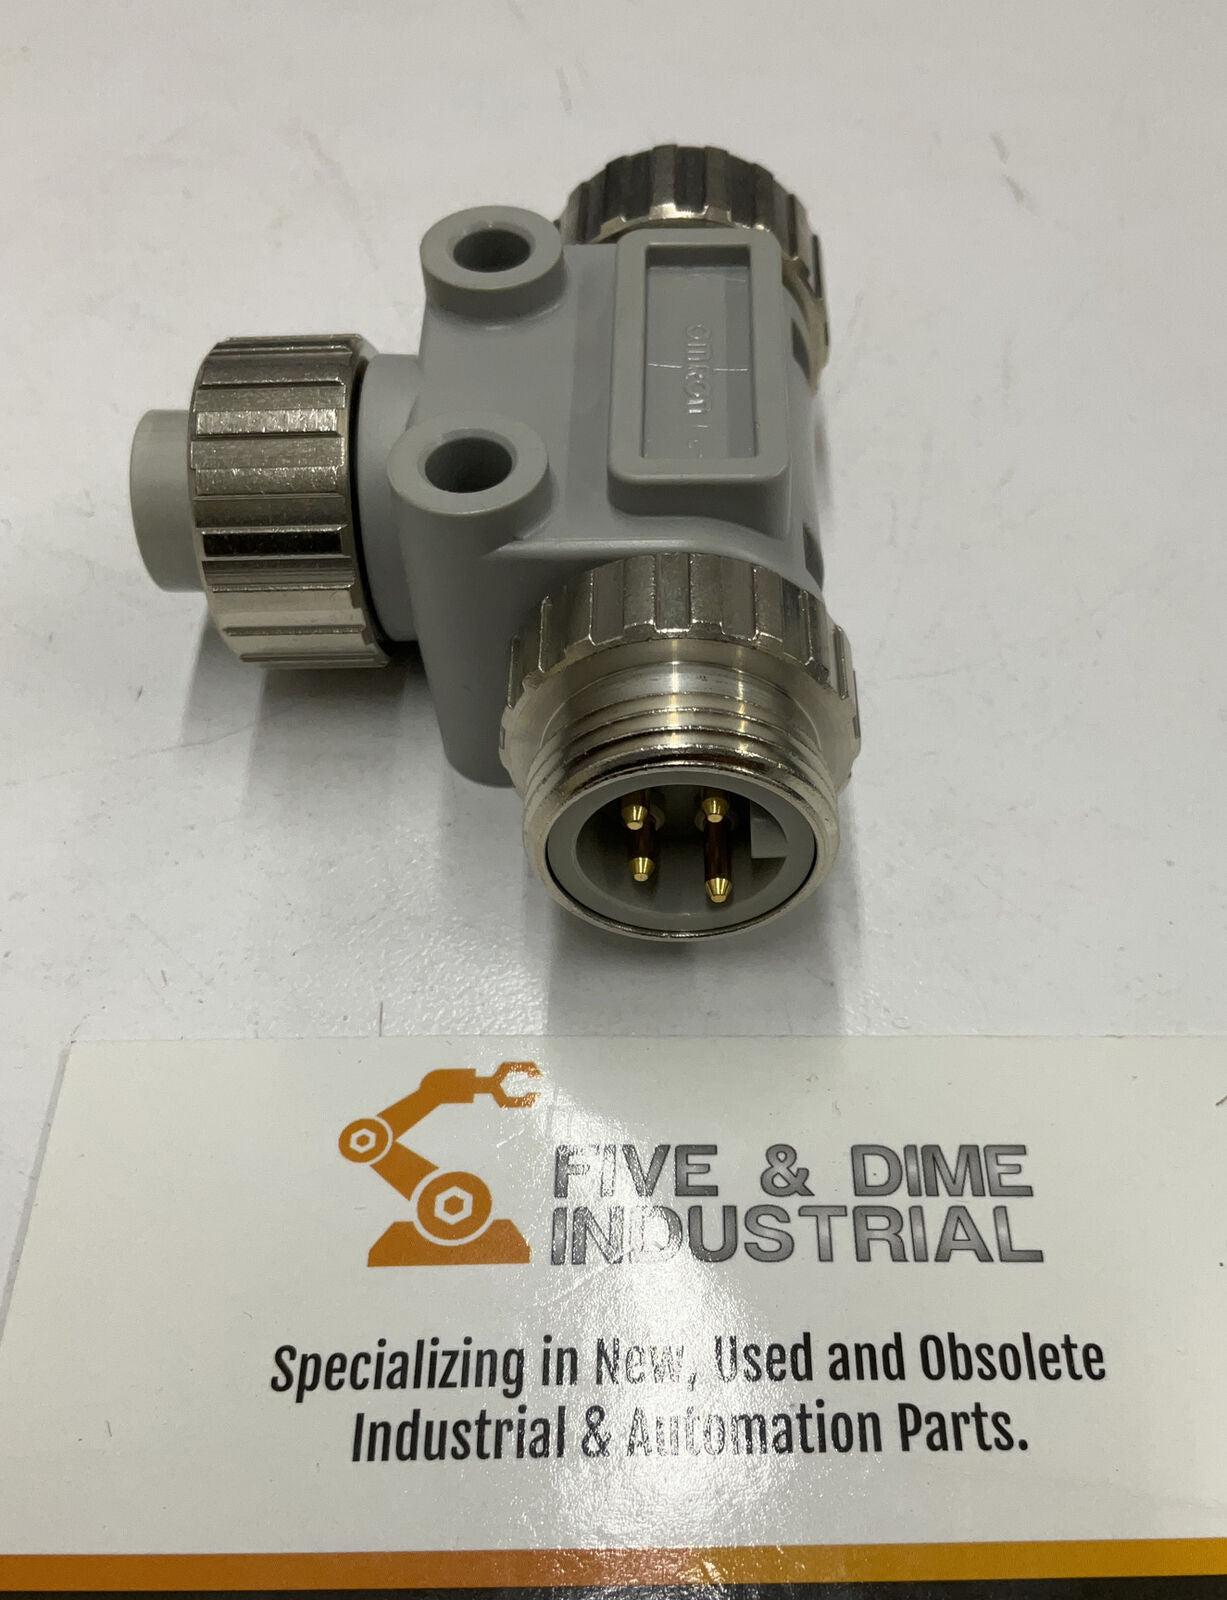 OMRON  XS4R-D424-5 New T-Branch Connector (RE138)